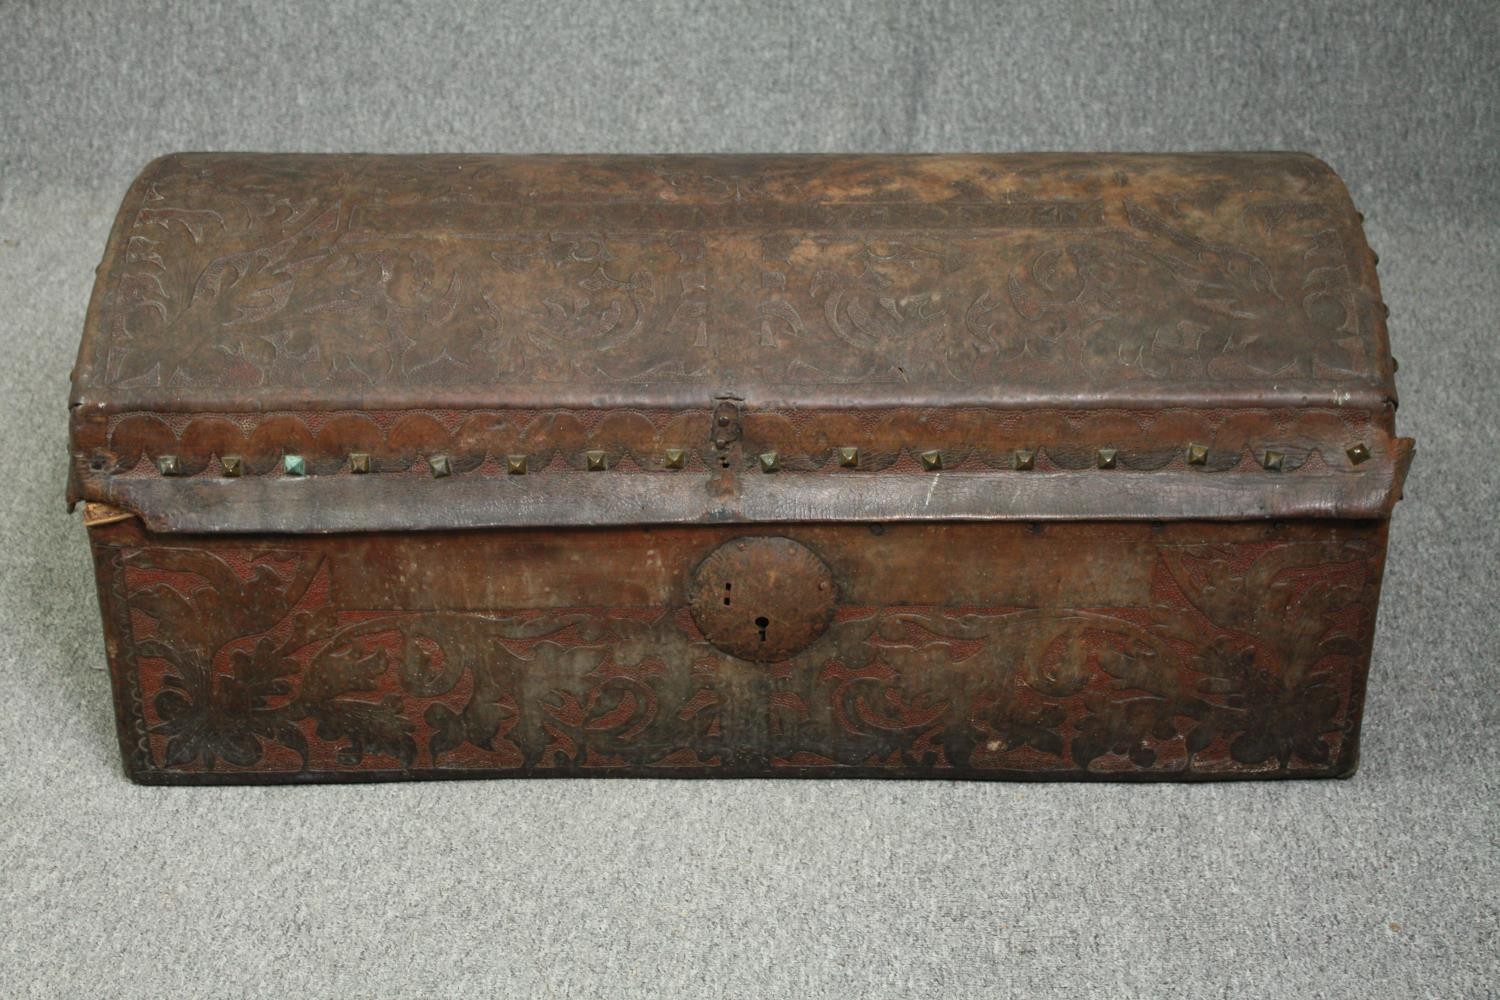 Travelling trunk, 19th century studded embossed leather. H.47 W.110 D.54cm.